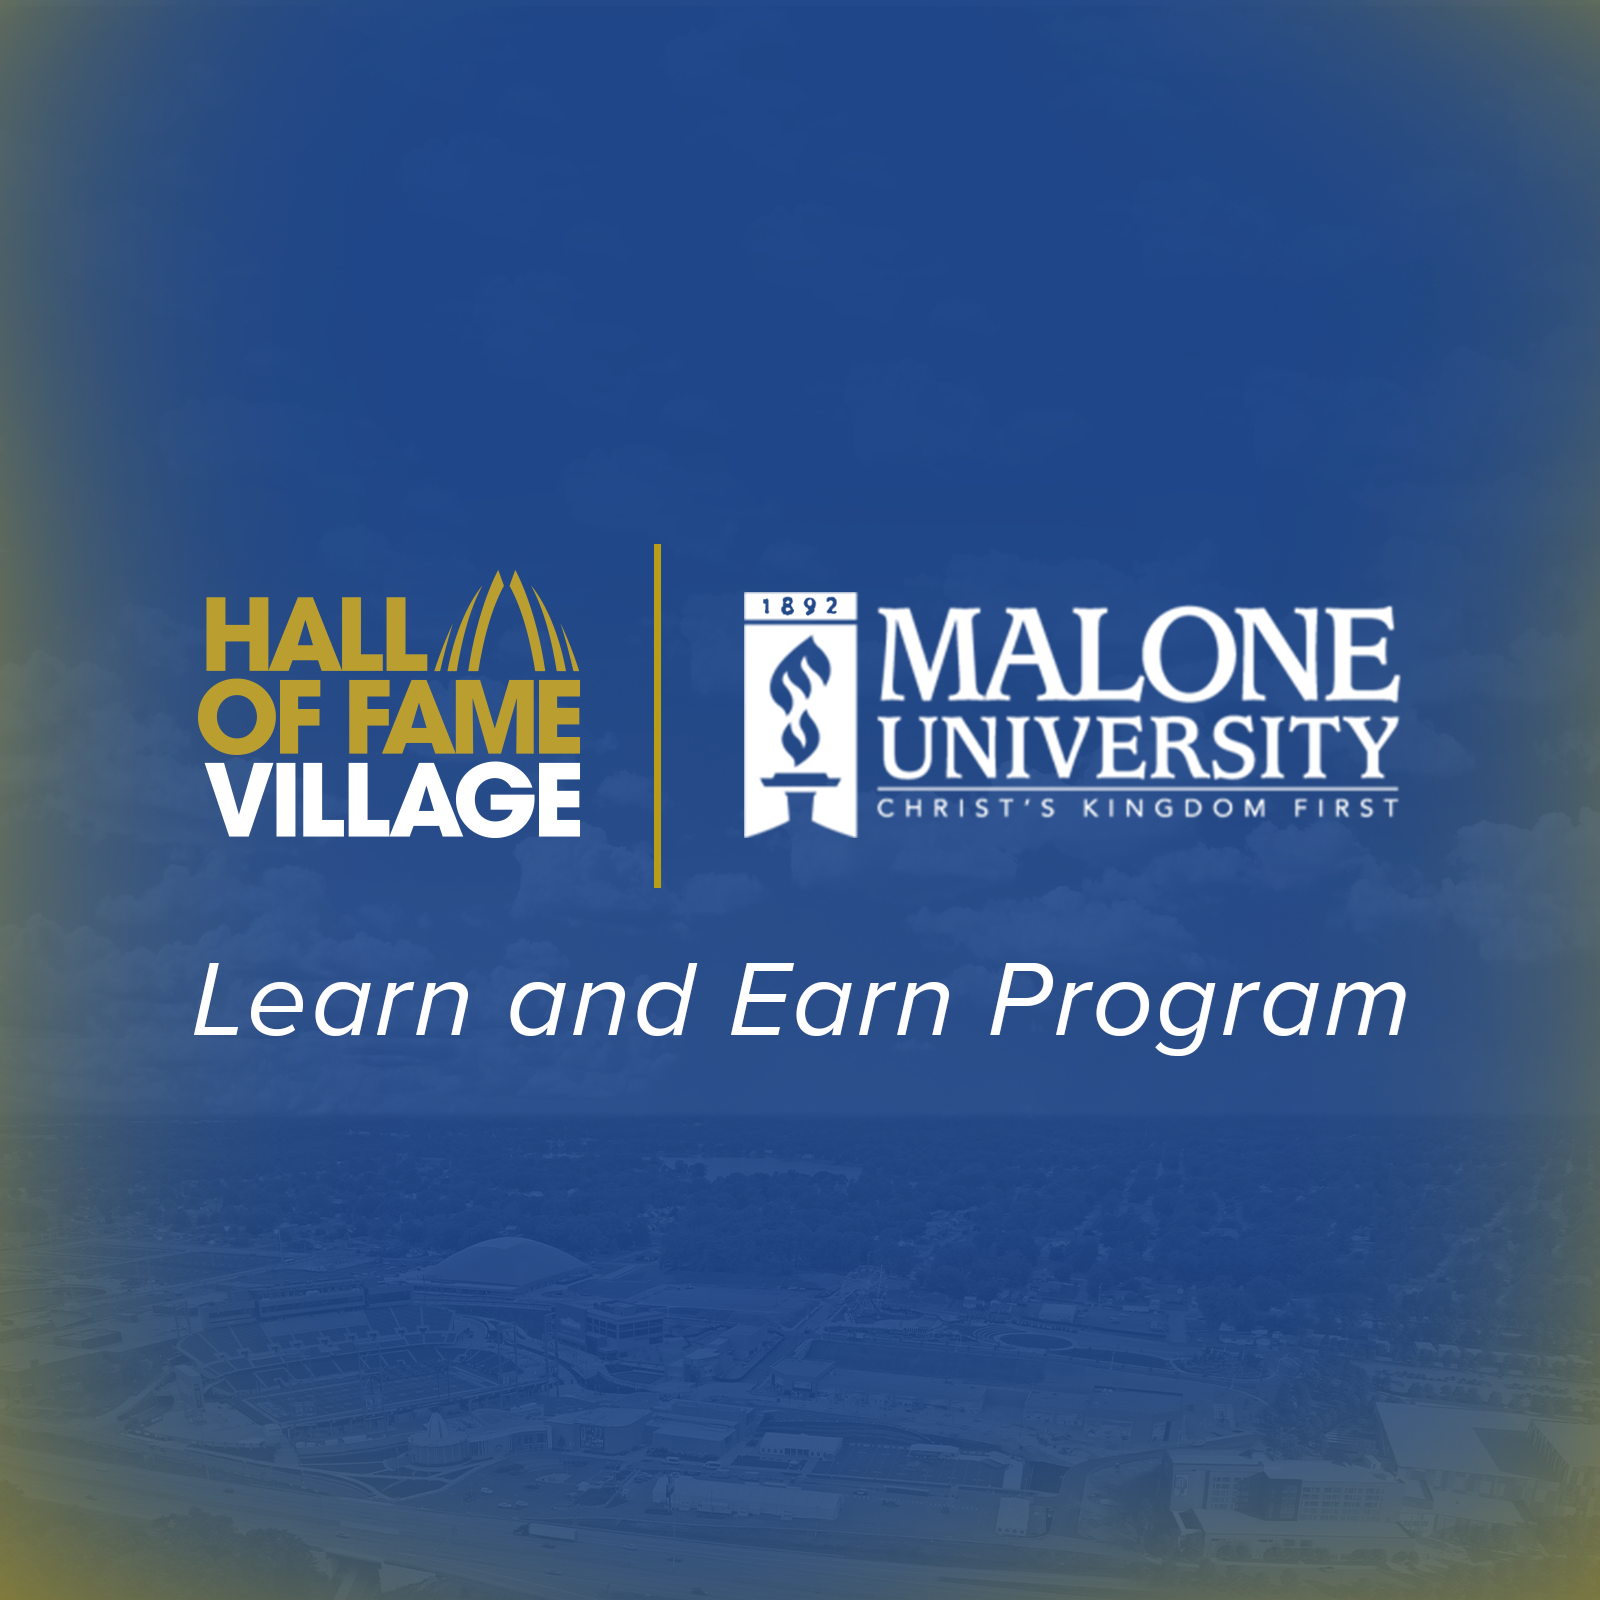 Malone University and Hall of Fame Village partner to launch Learn and Earn Program